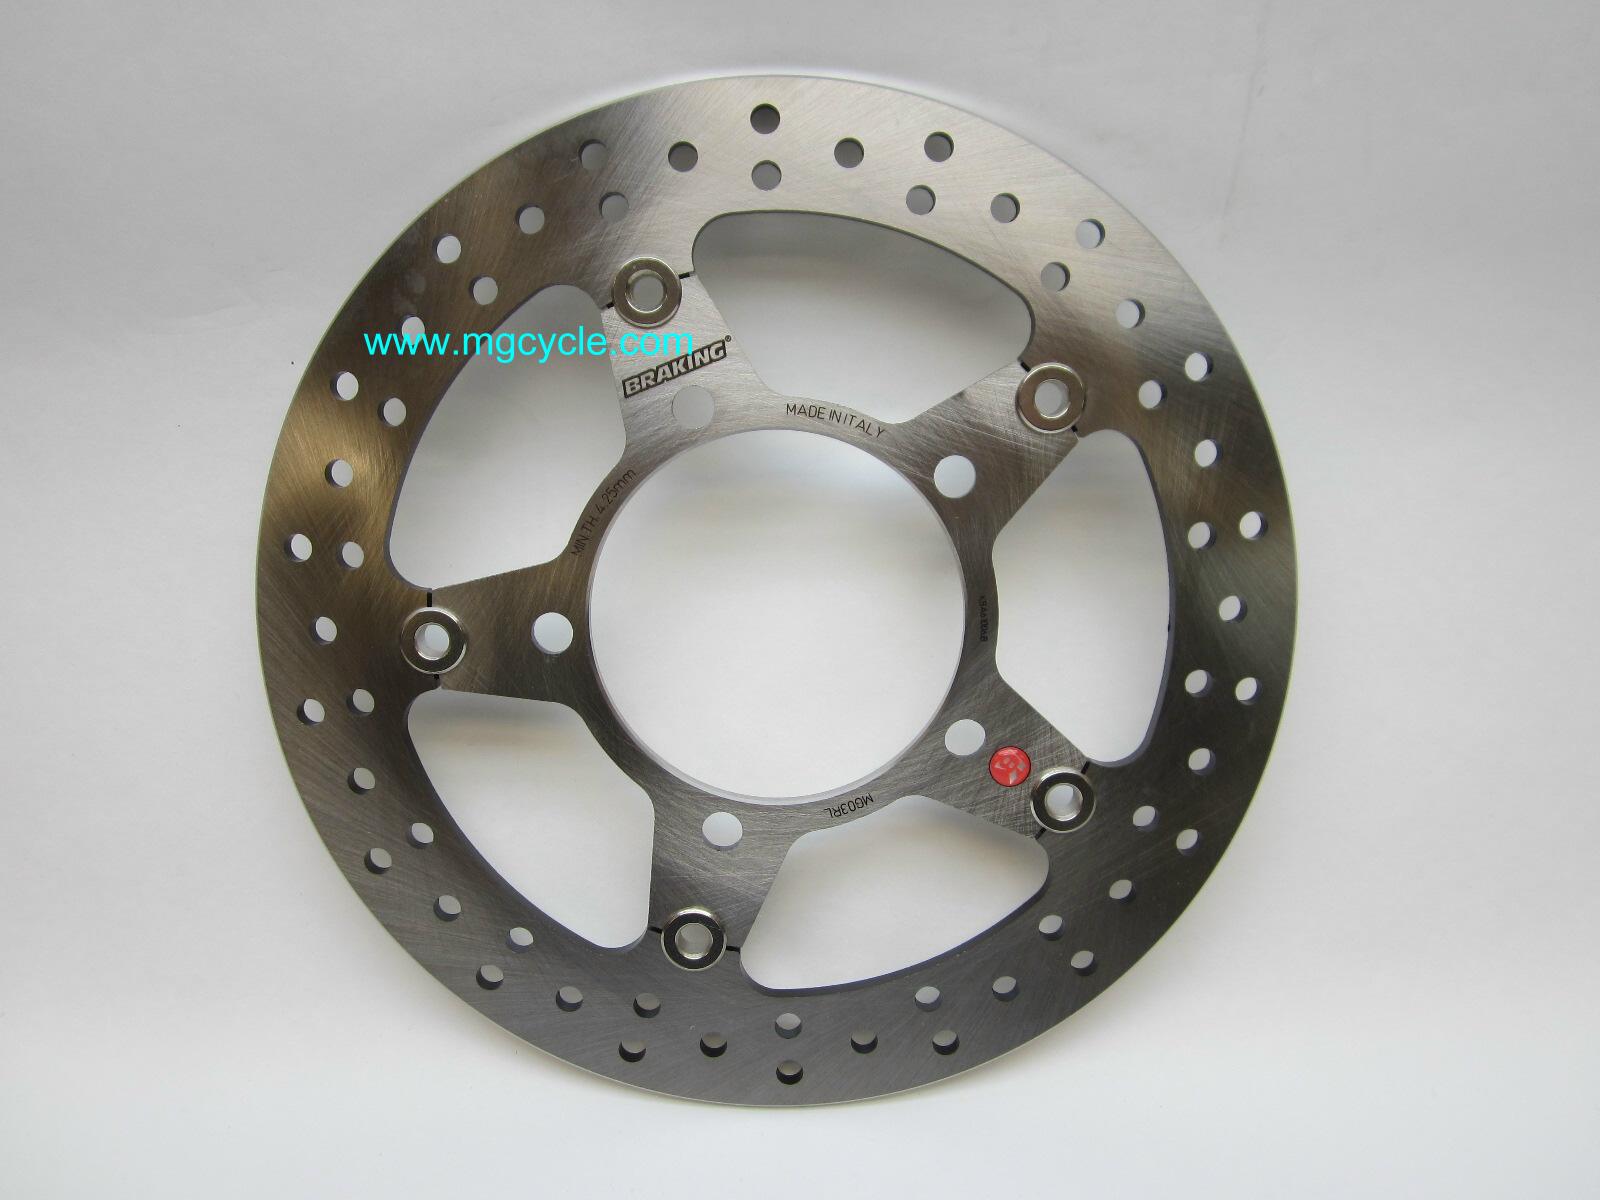 260mm replacement rear disk, Quota 1100 ES 2nd series